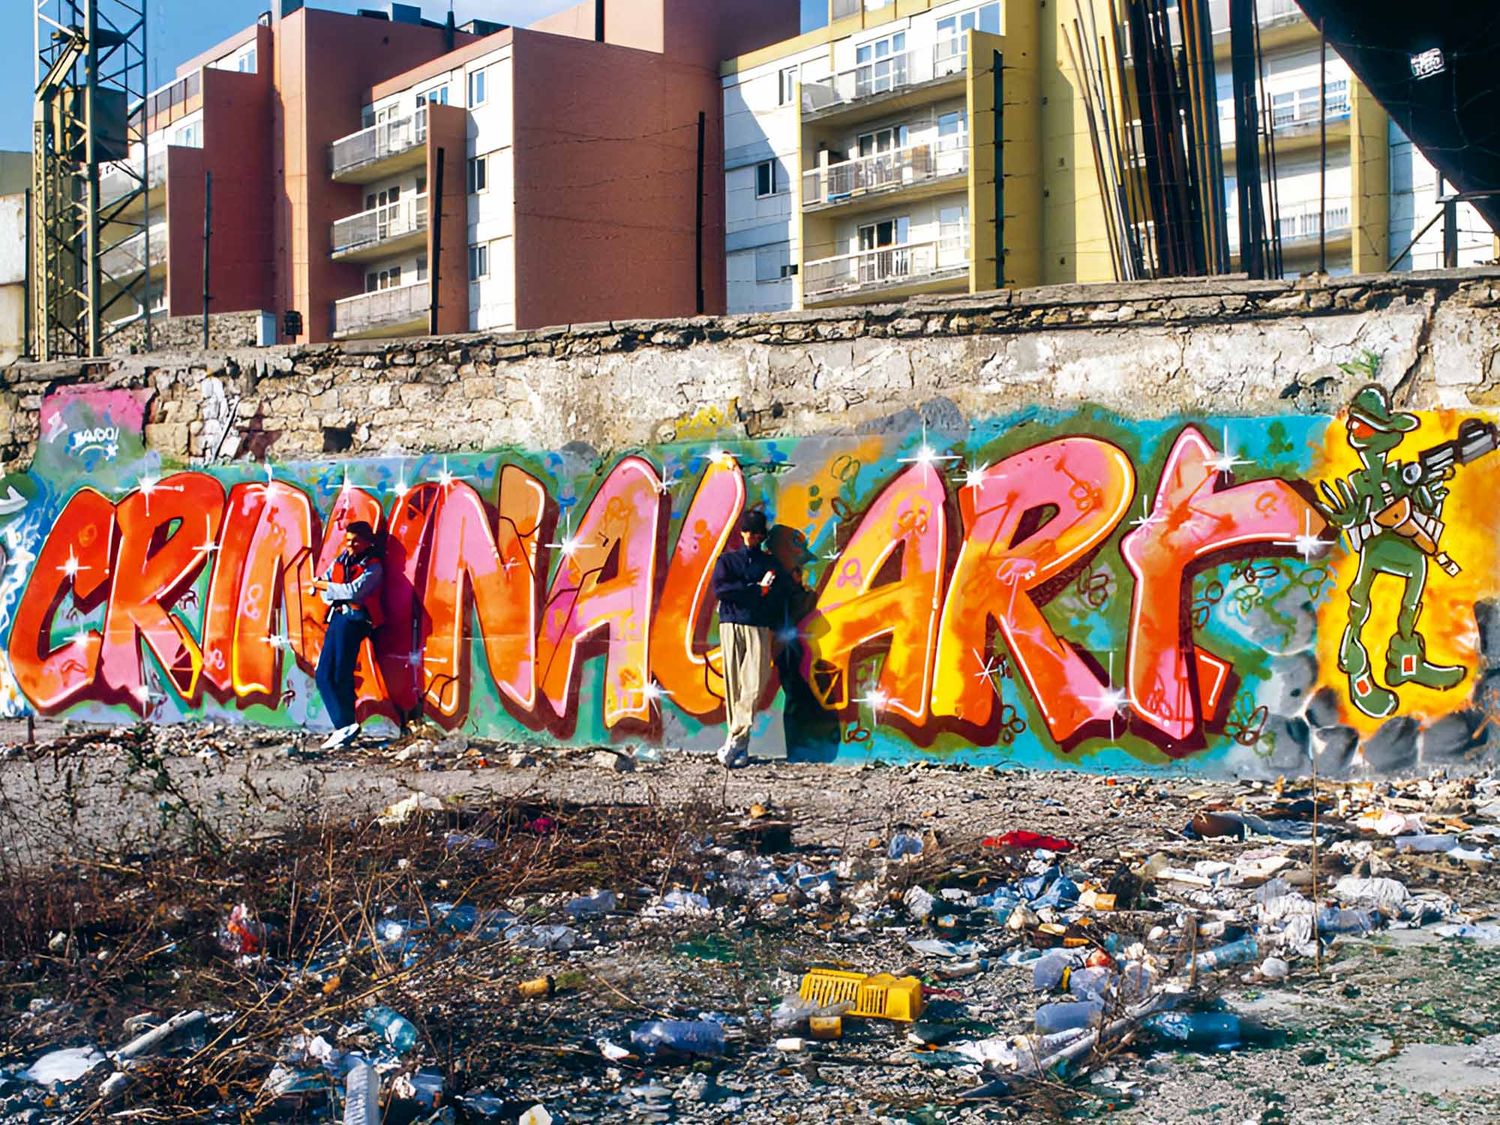 Done at the end of the eighties by Bando and Doc, “Criminal Art” is probably the most iconic graffiti mural from the era of the wasteland of Stalingrad-La Chapelle in Paris (©Claude Abron).